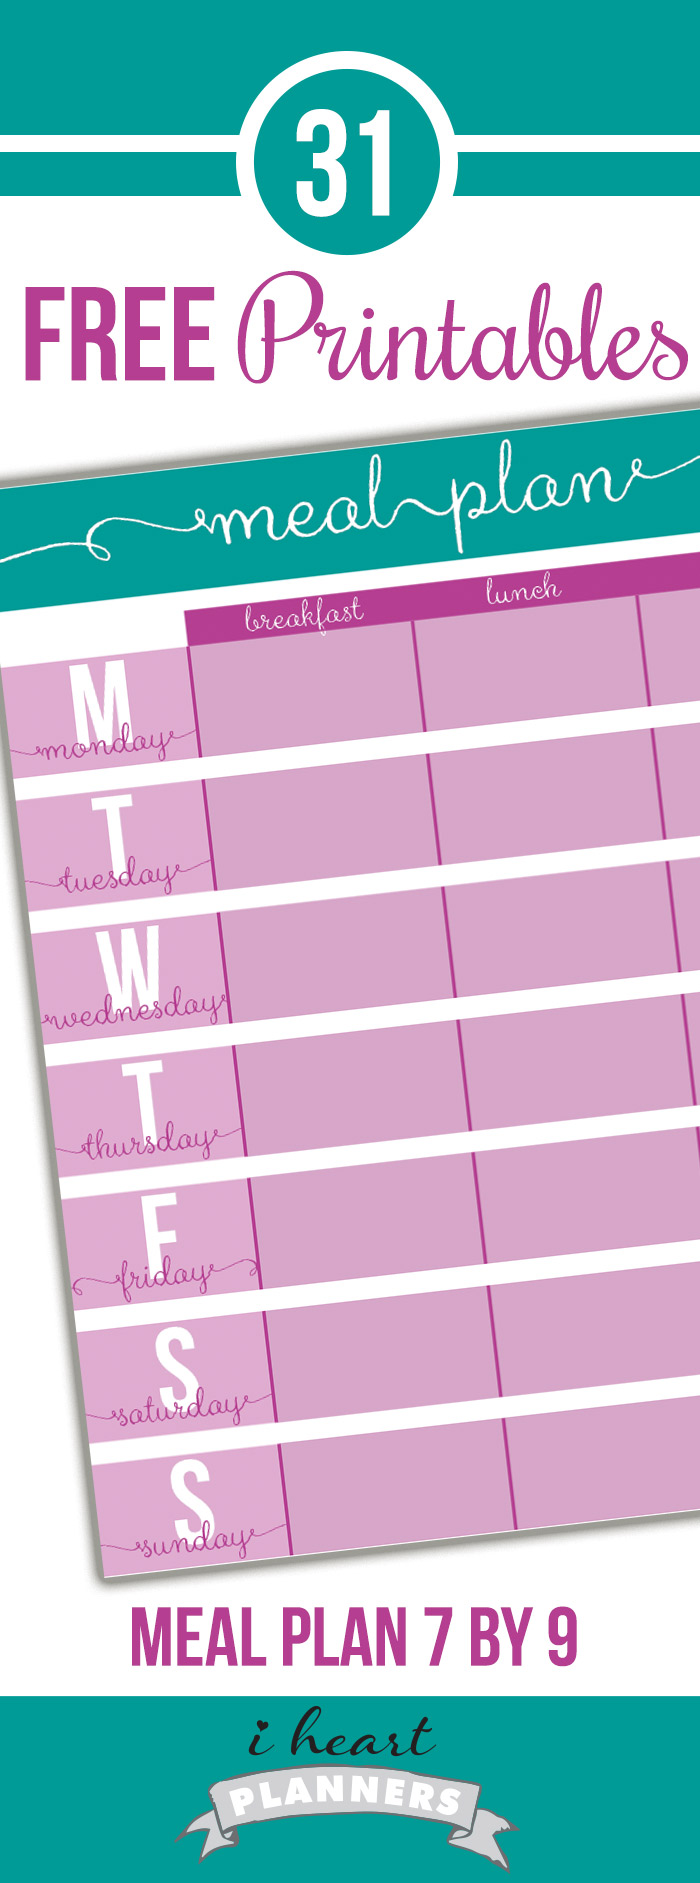 Free printable menu planner to go in life planners (like Erin Condren or Plum Paper). It prints on regular letter paper and has crop marks so you can trim to it to size. (It perfectly matches the size of the Erin Condren/Plum Paper planners). Then you can use coil clips to put it in your planner.